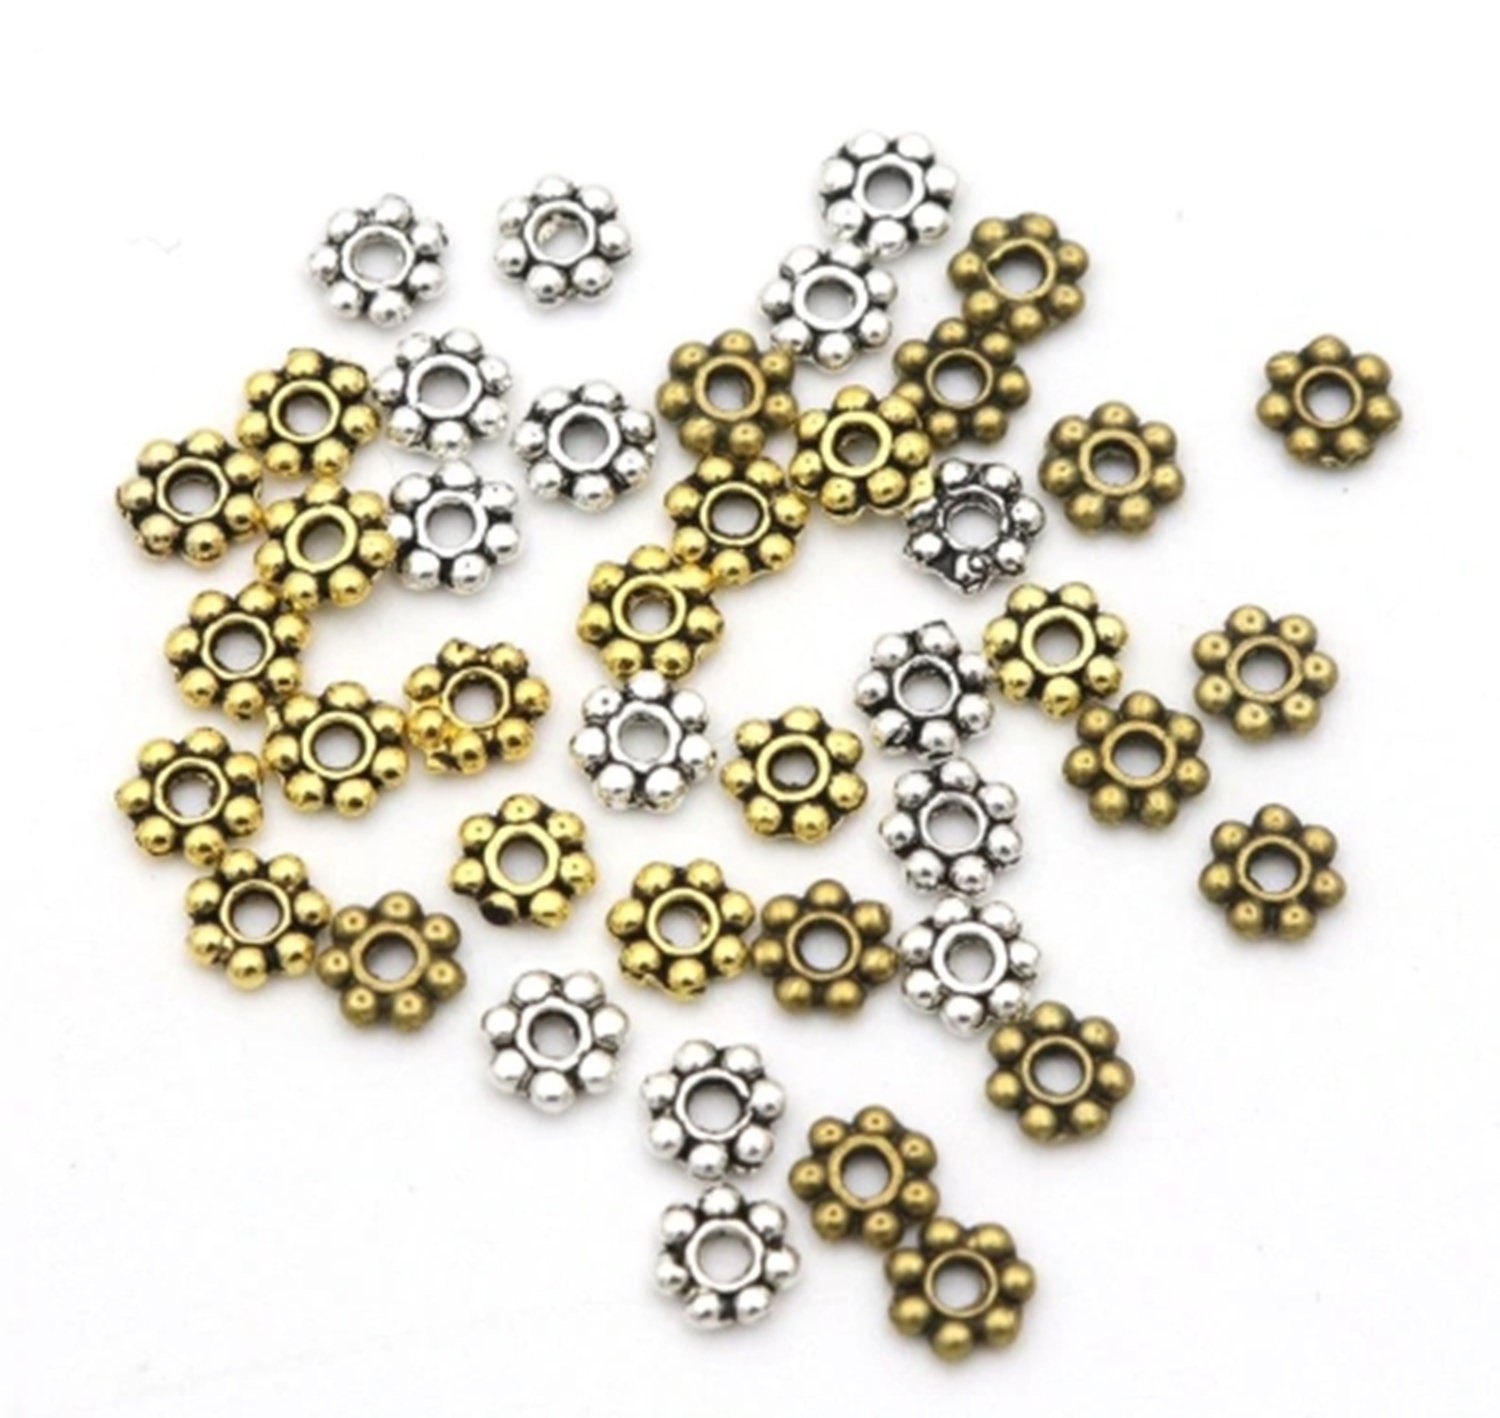 Wholesale 1000 PCS Tibetan Silver Daisy Flower Spacer Beads Jewelry Findings 4mm 